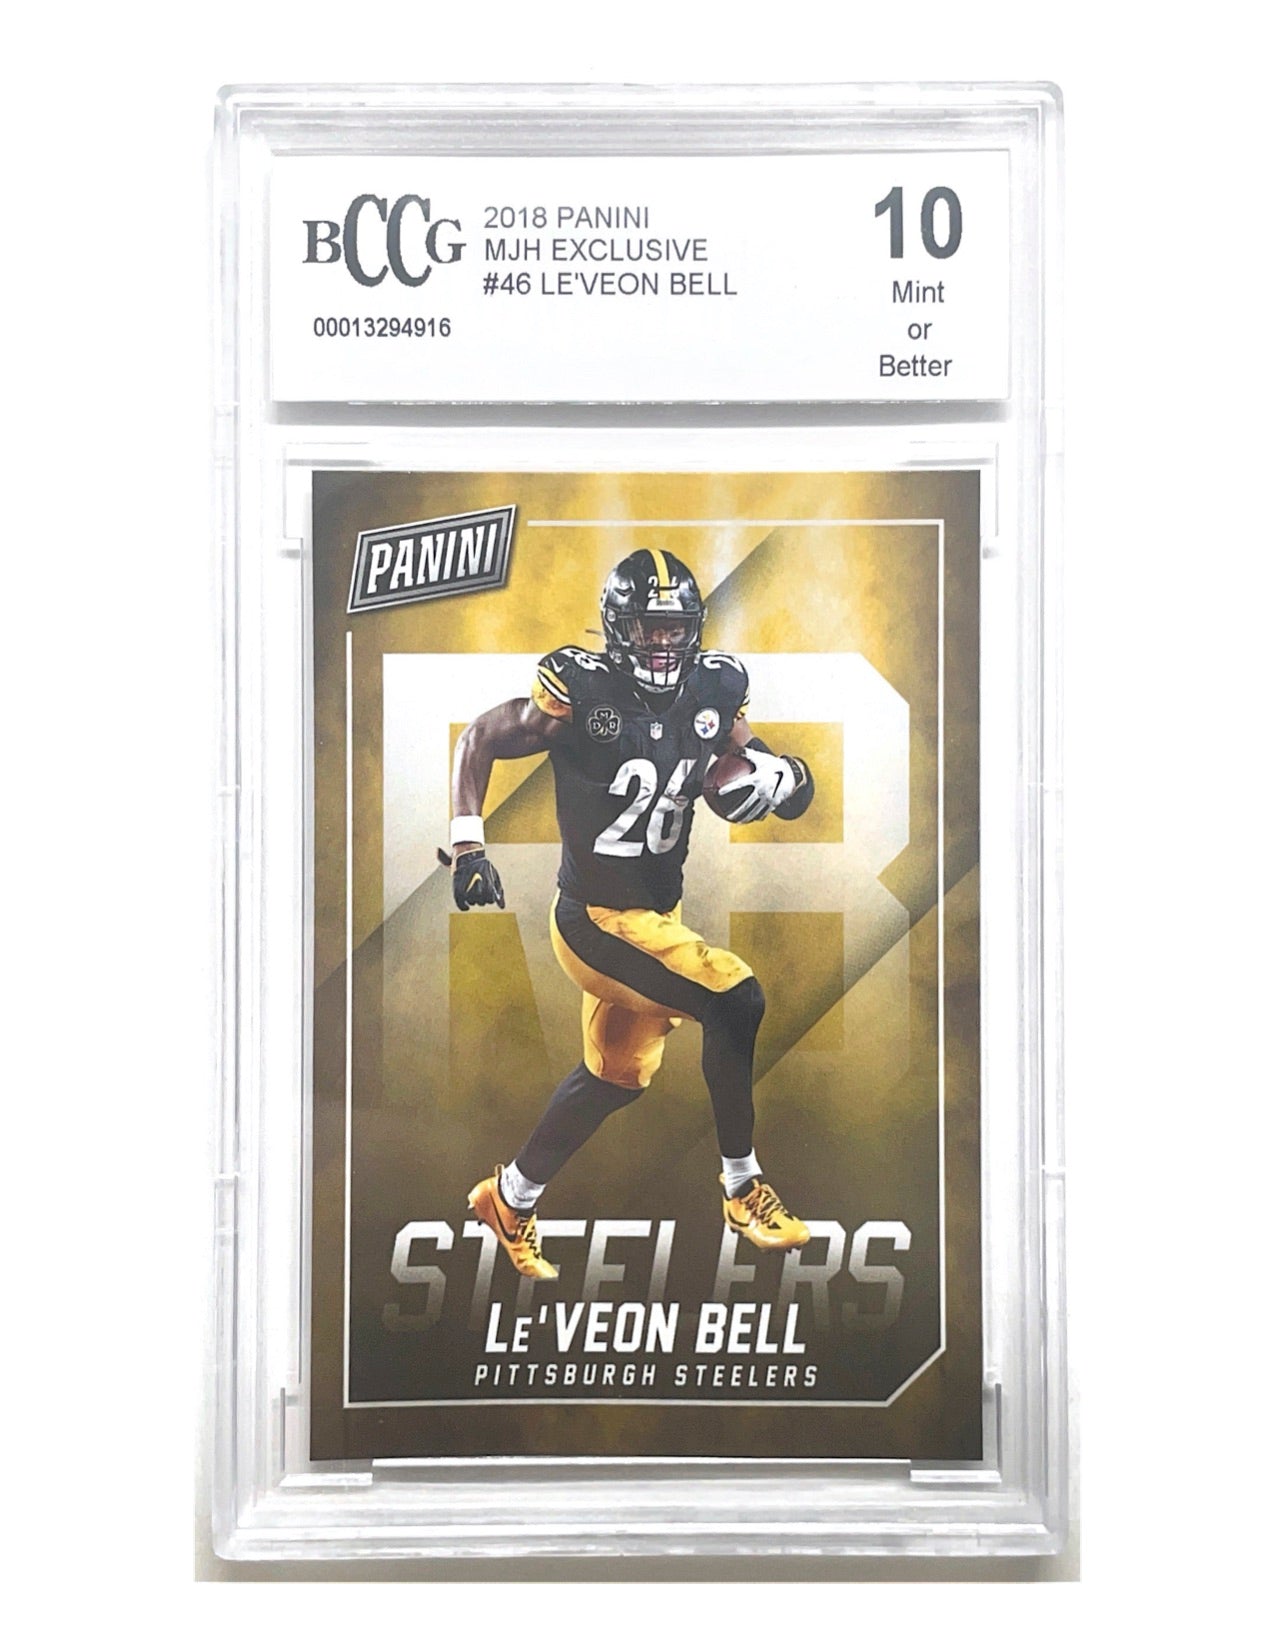 Le'Veon Bell 2018 Panini MJ Holdings Exclusive #46 - BCCG 10